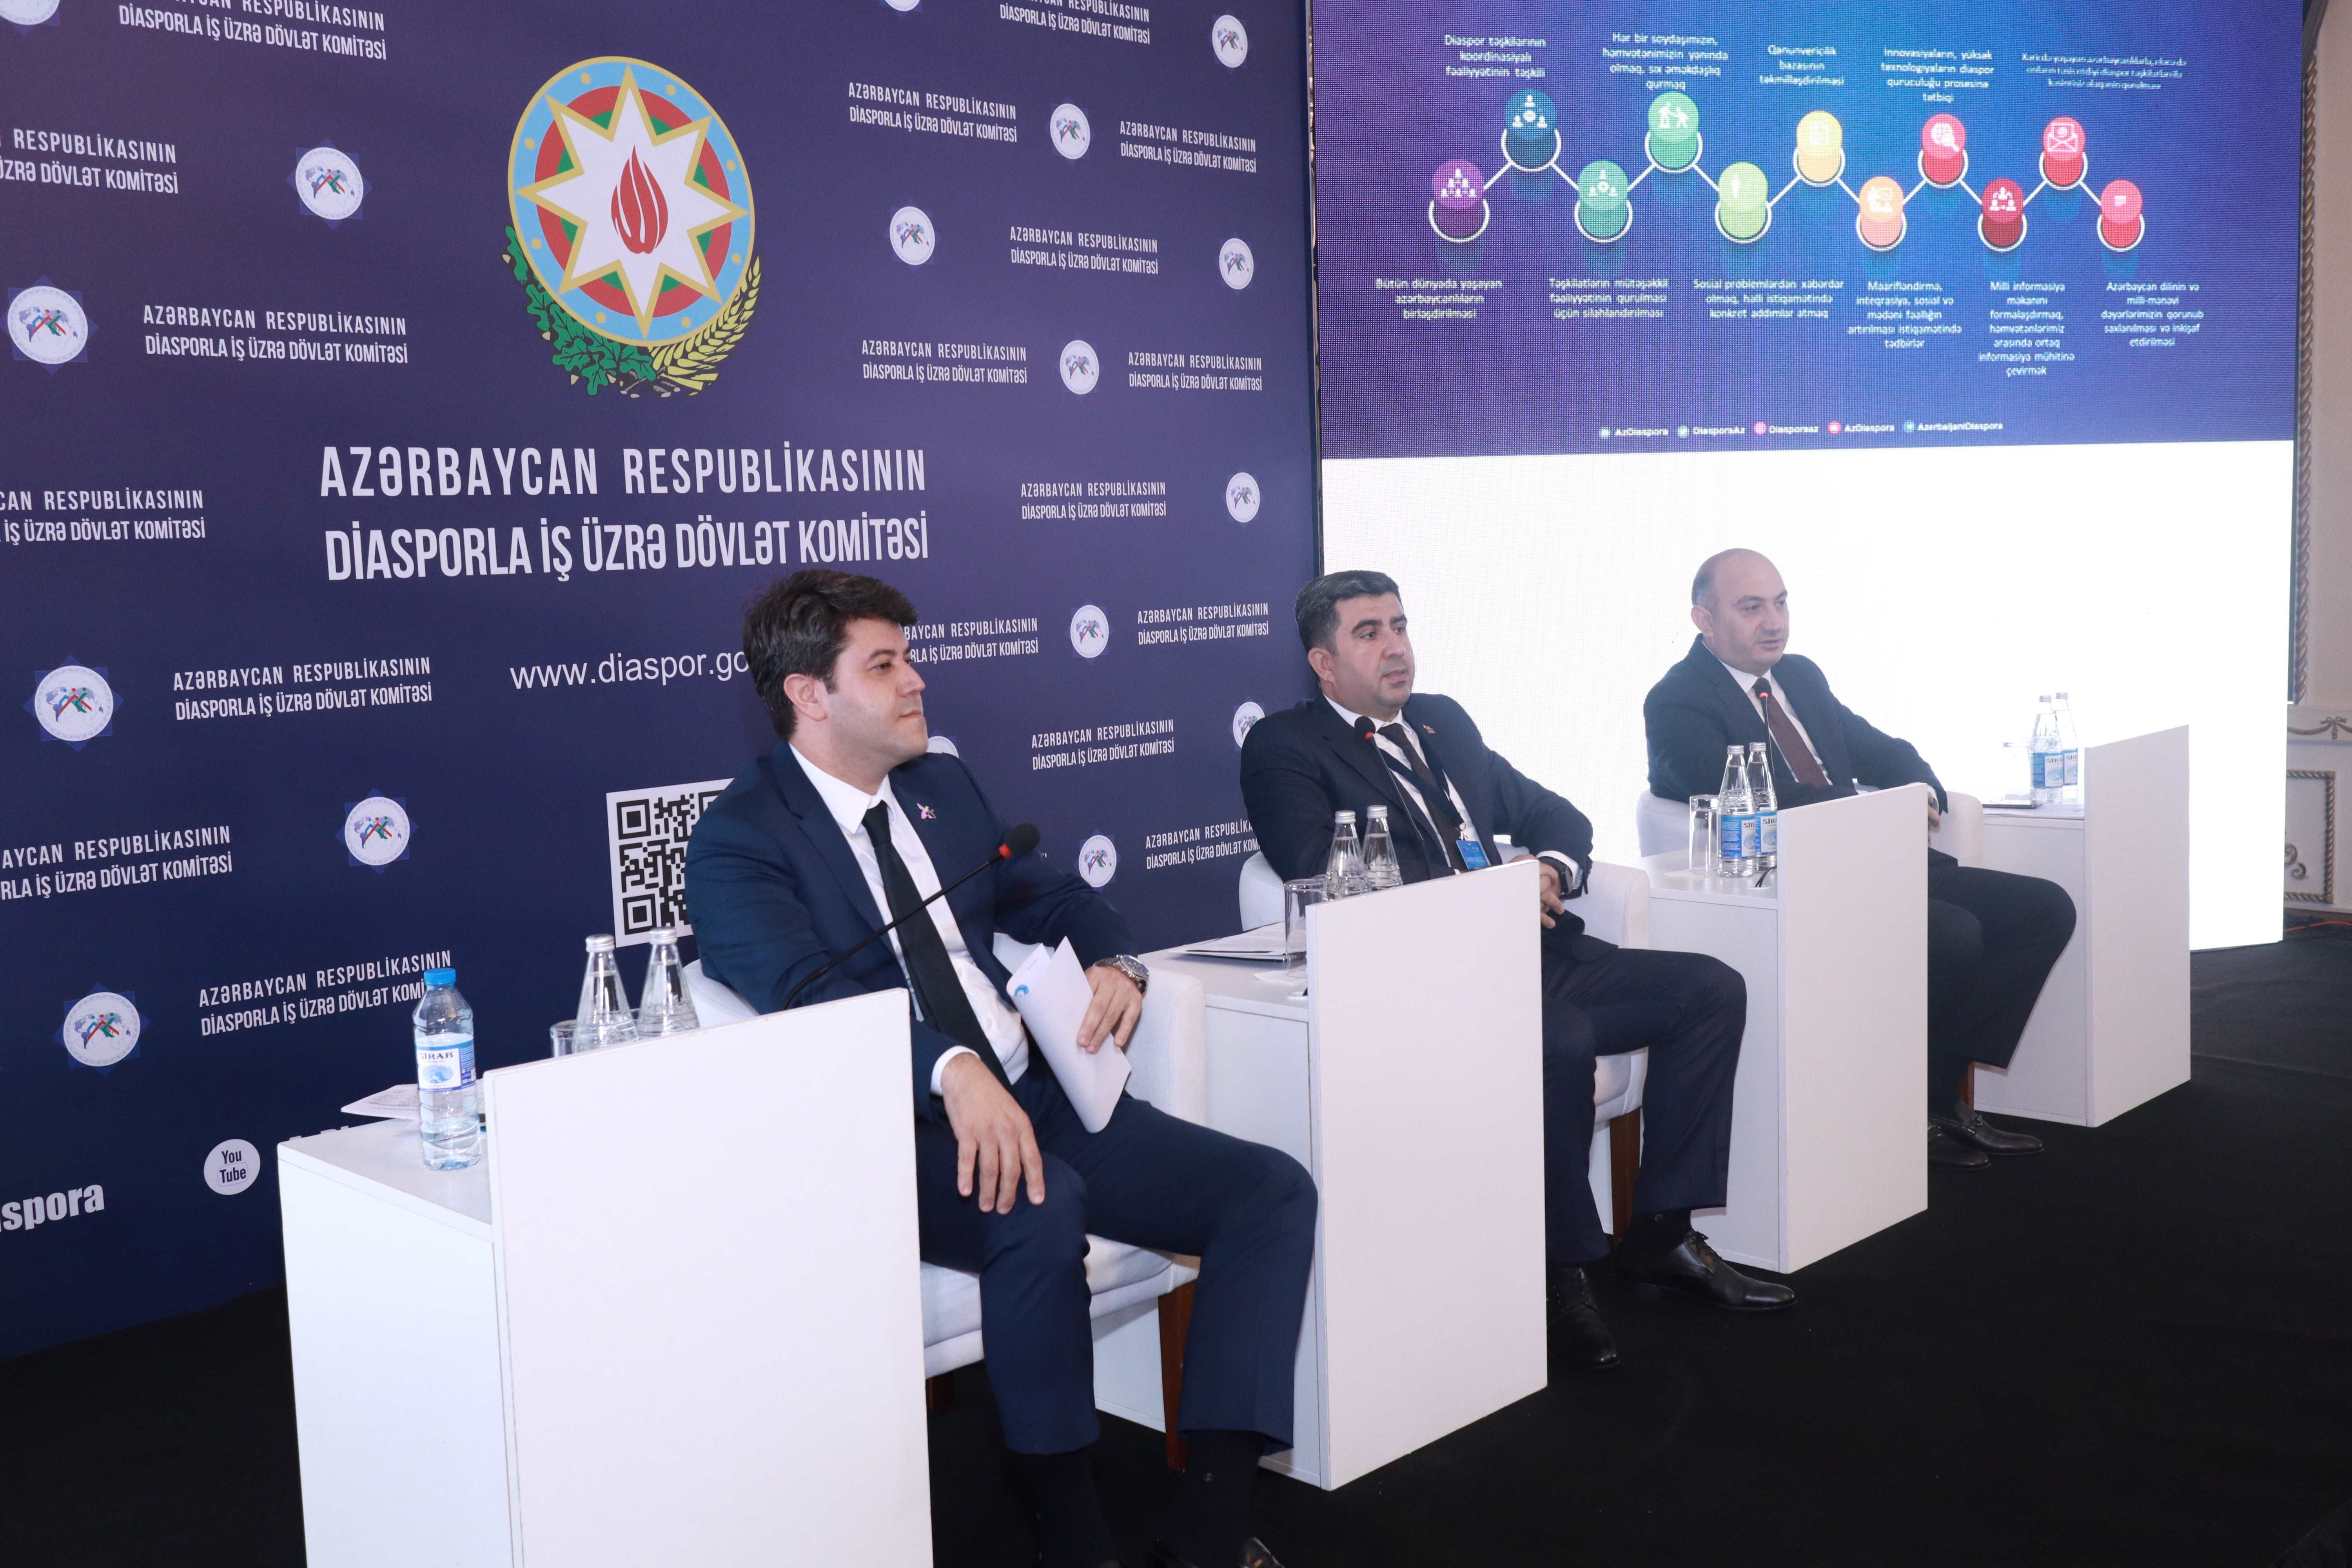 The perspectives of joint activity of the diaspora youth of Turkic states was highlighted at the Forum 